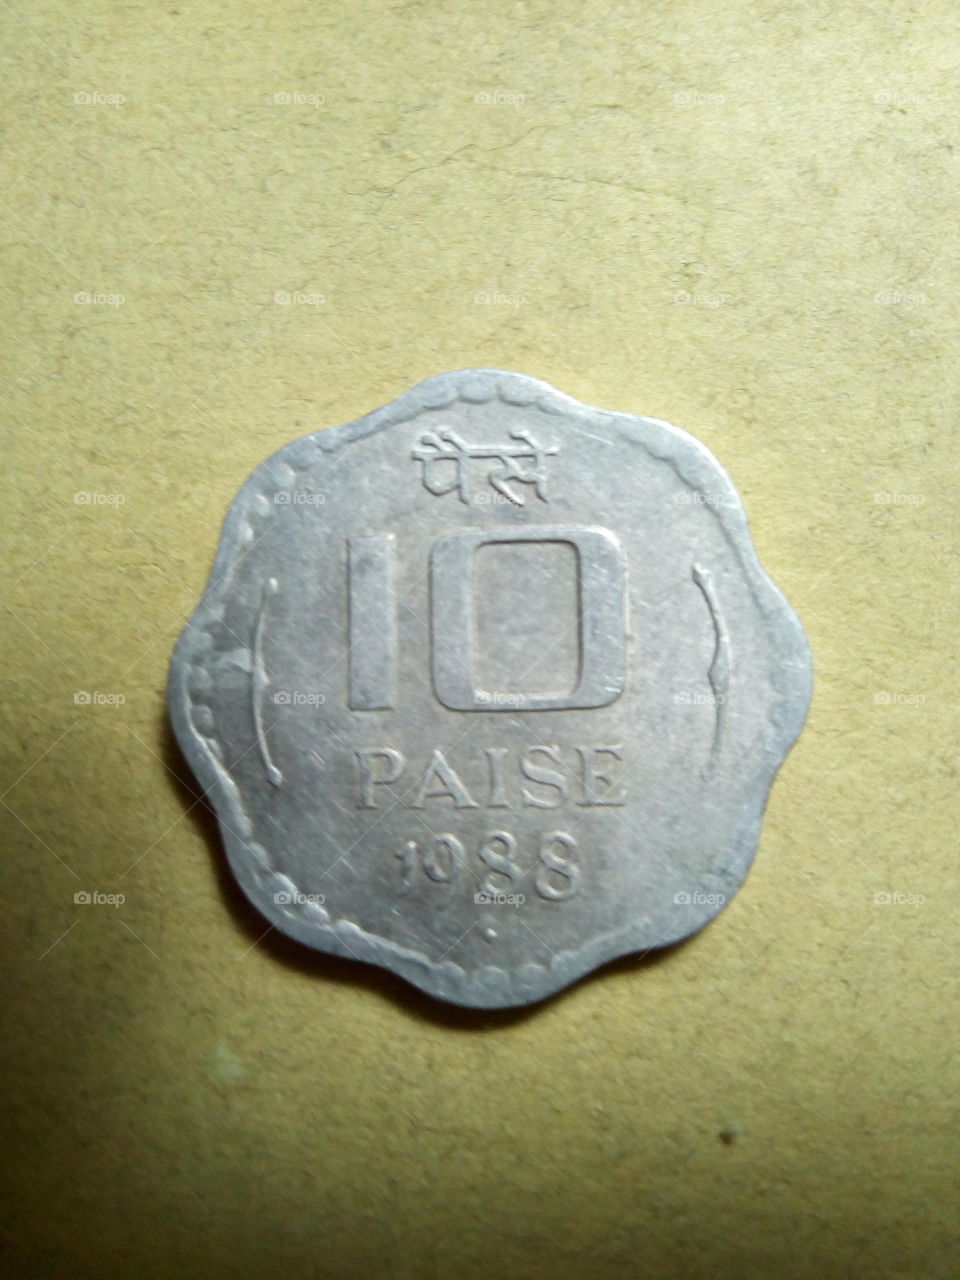 A coin of ten paise- 1/10 share of Indian Rupee issued by Government of India in 1988.